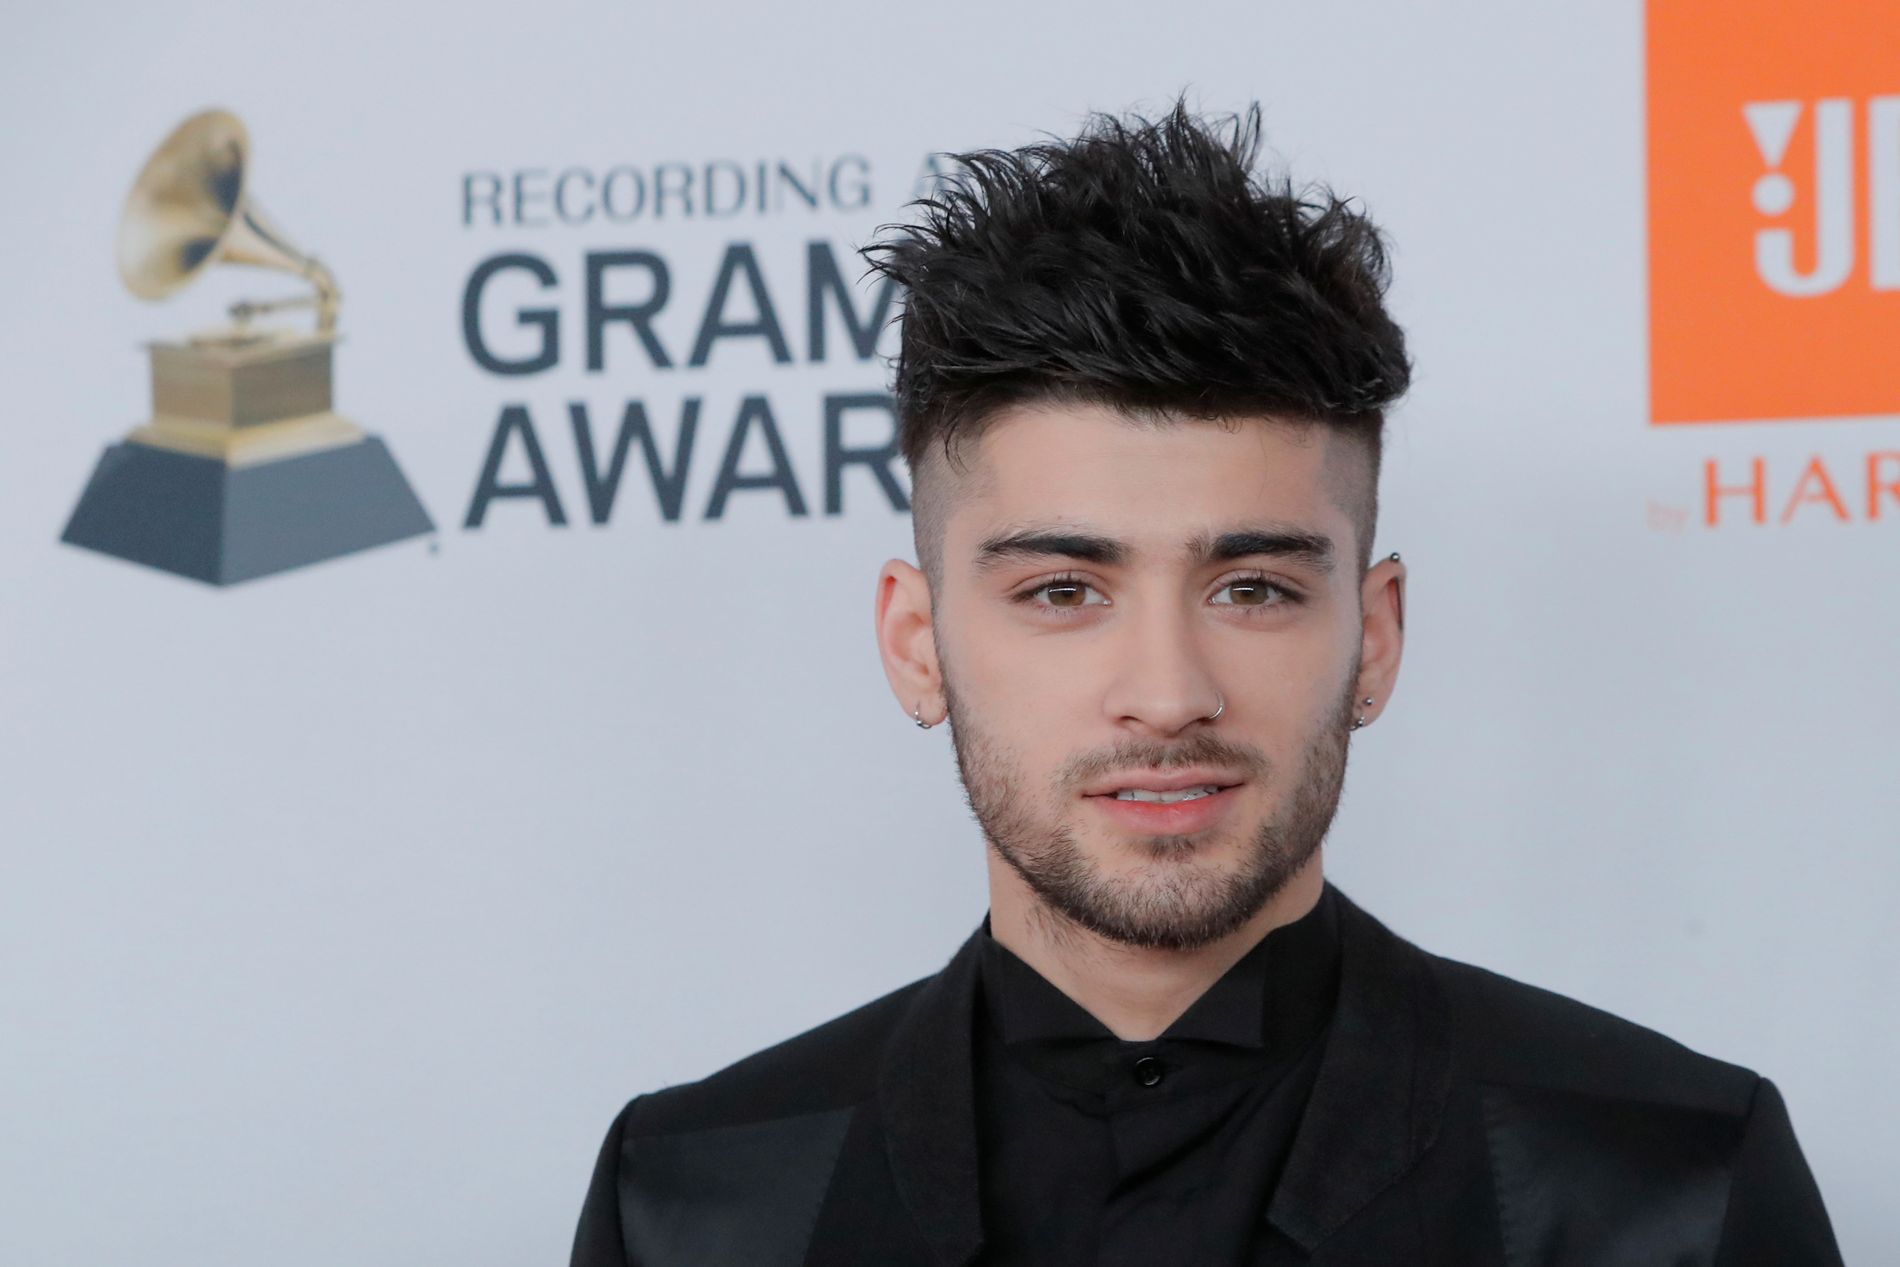 Sol: Zayn Malik was a former member of the Boyband One Direction before deciding to bet on his solo career. 